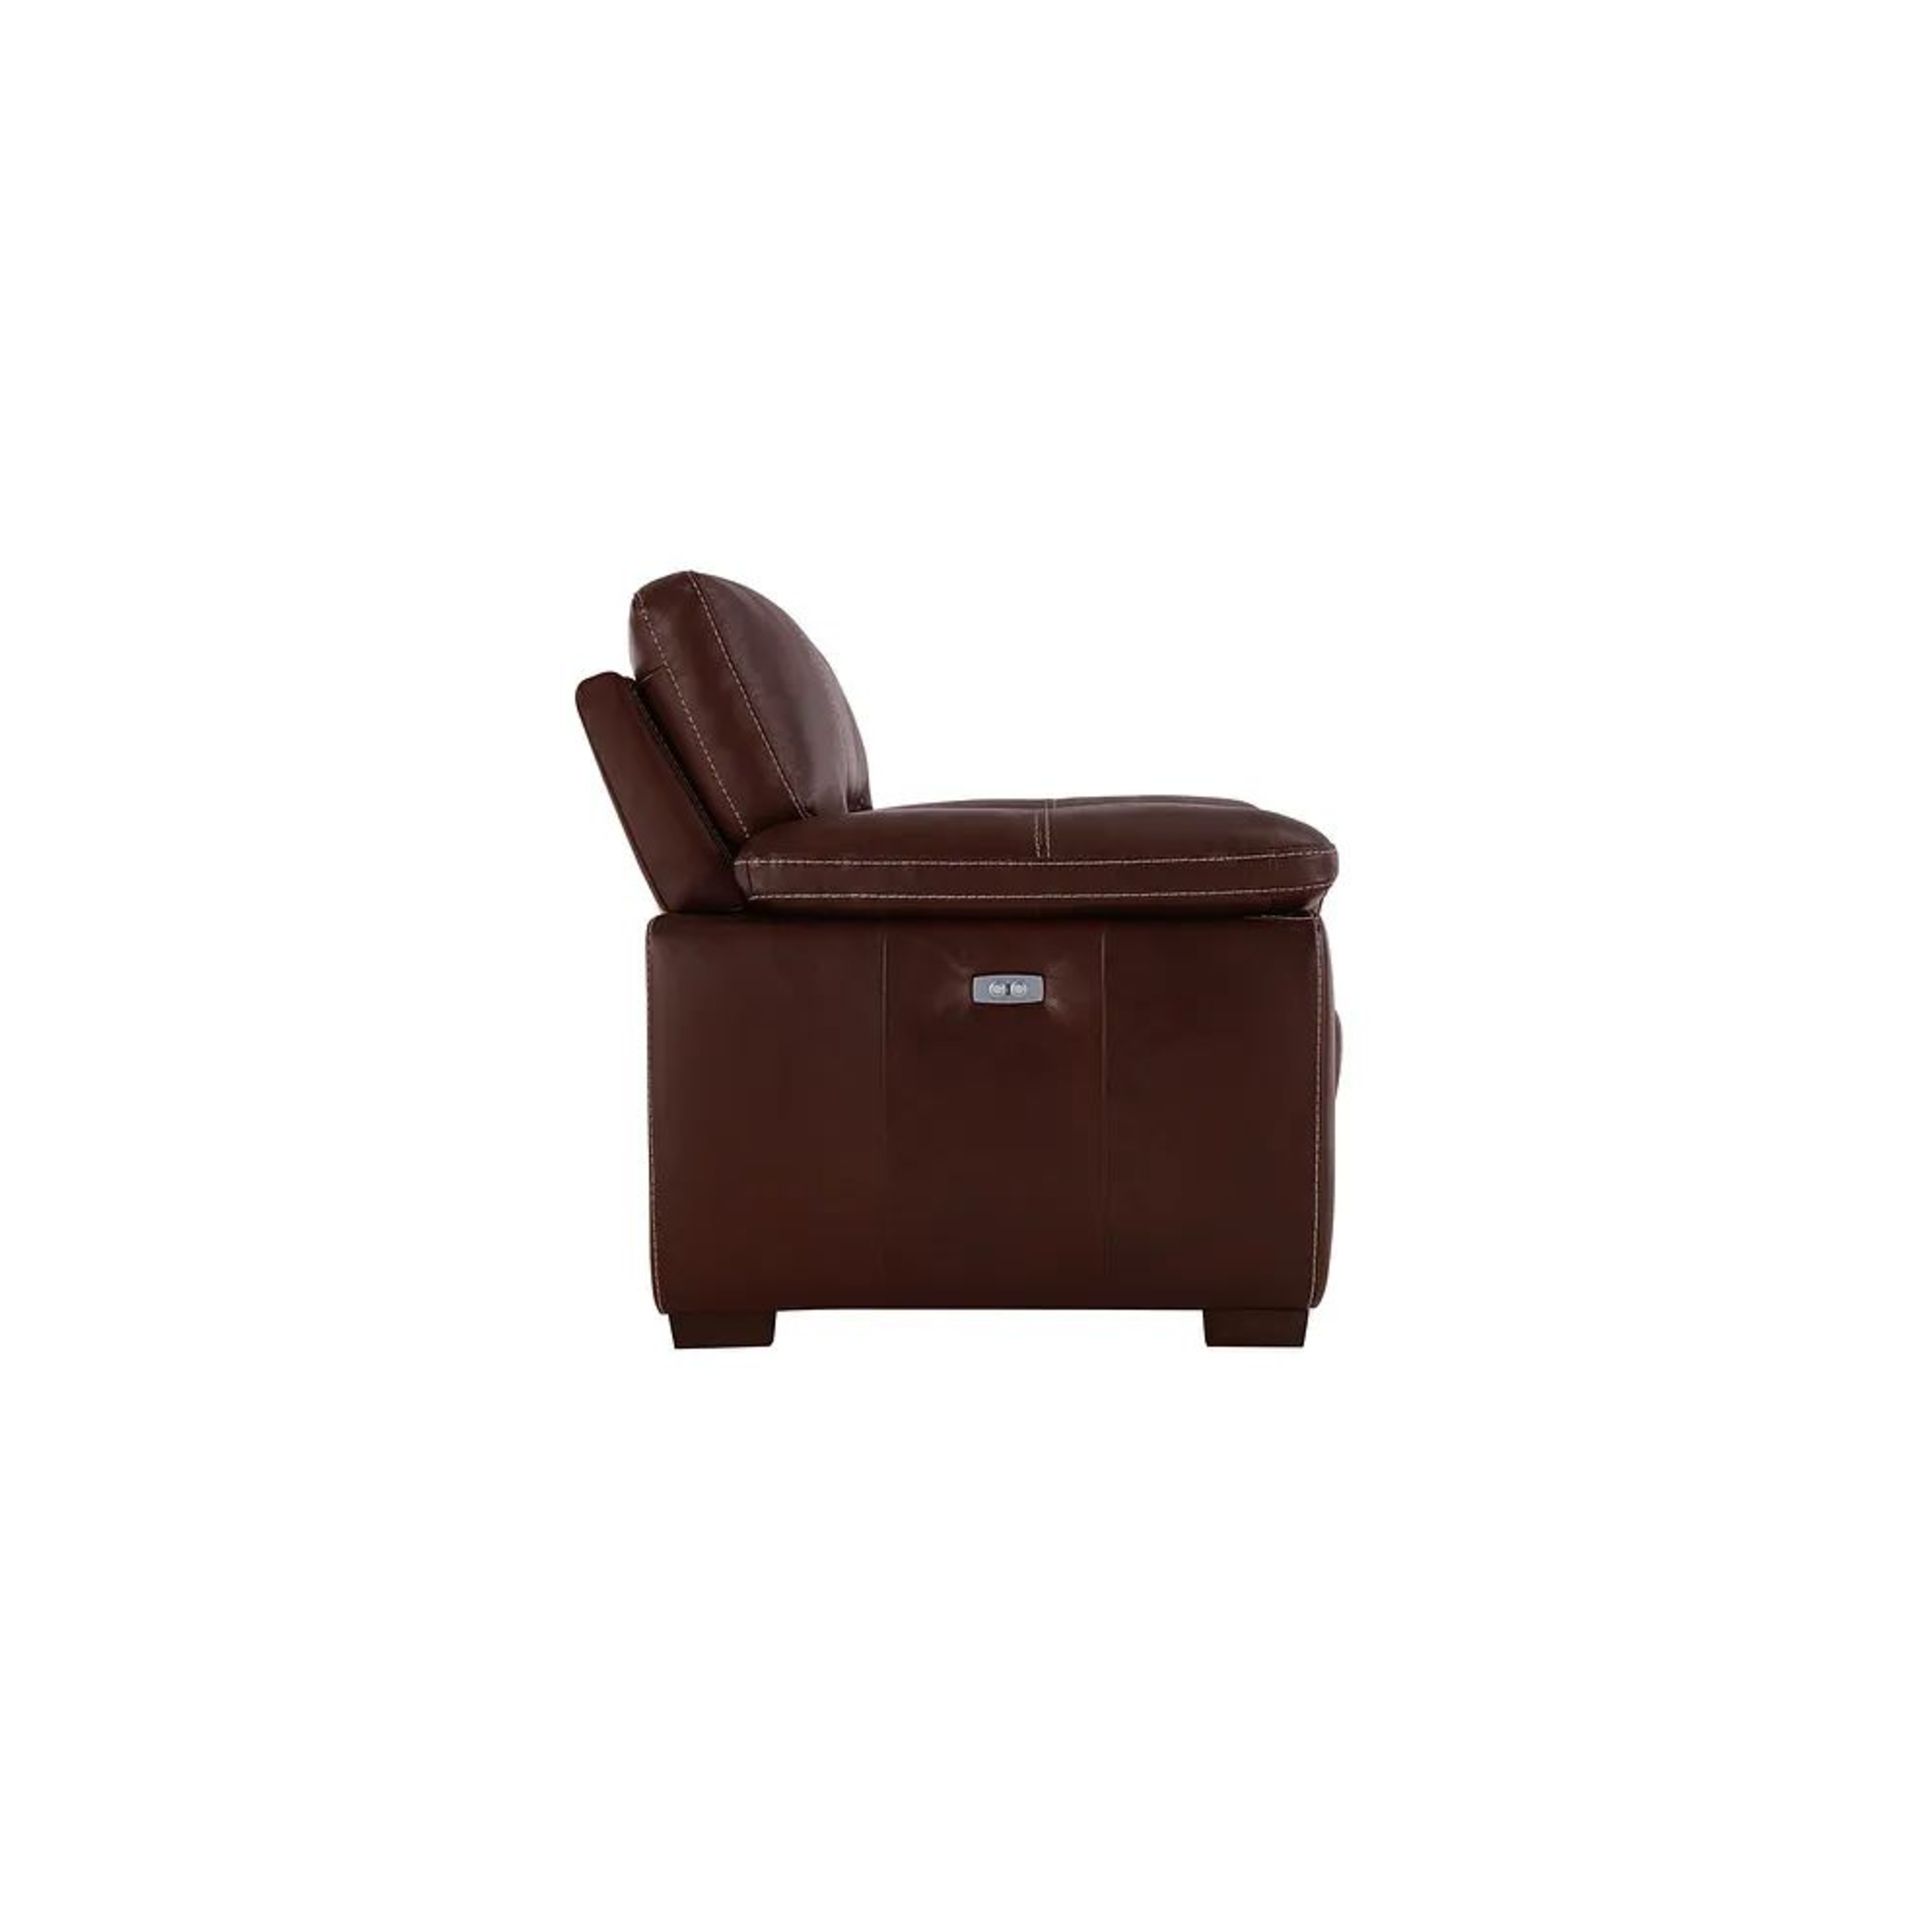 BRAND NEW ARLINGTON Electric Recliner Armchair - TAN LEATHER. RRP £1199. Create a traditional and - Image 6 of 12